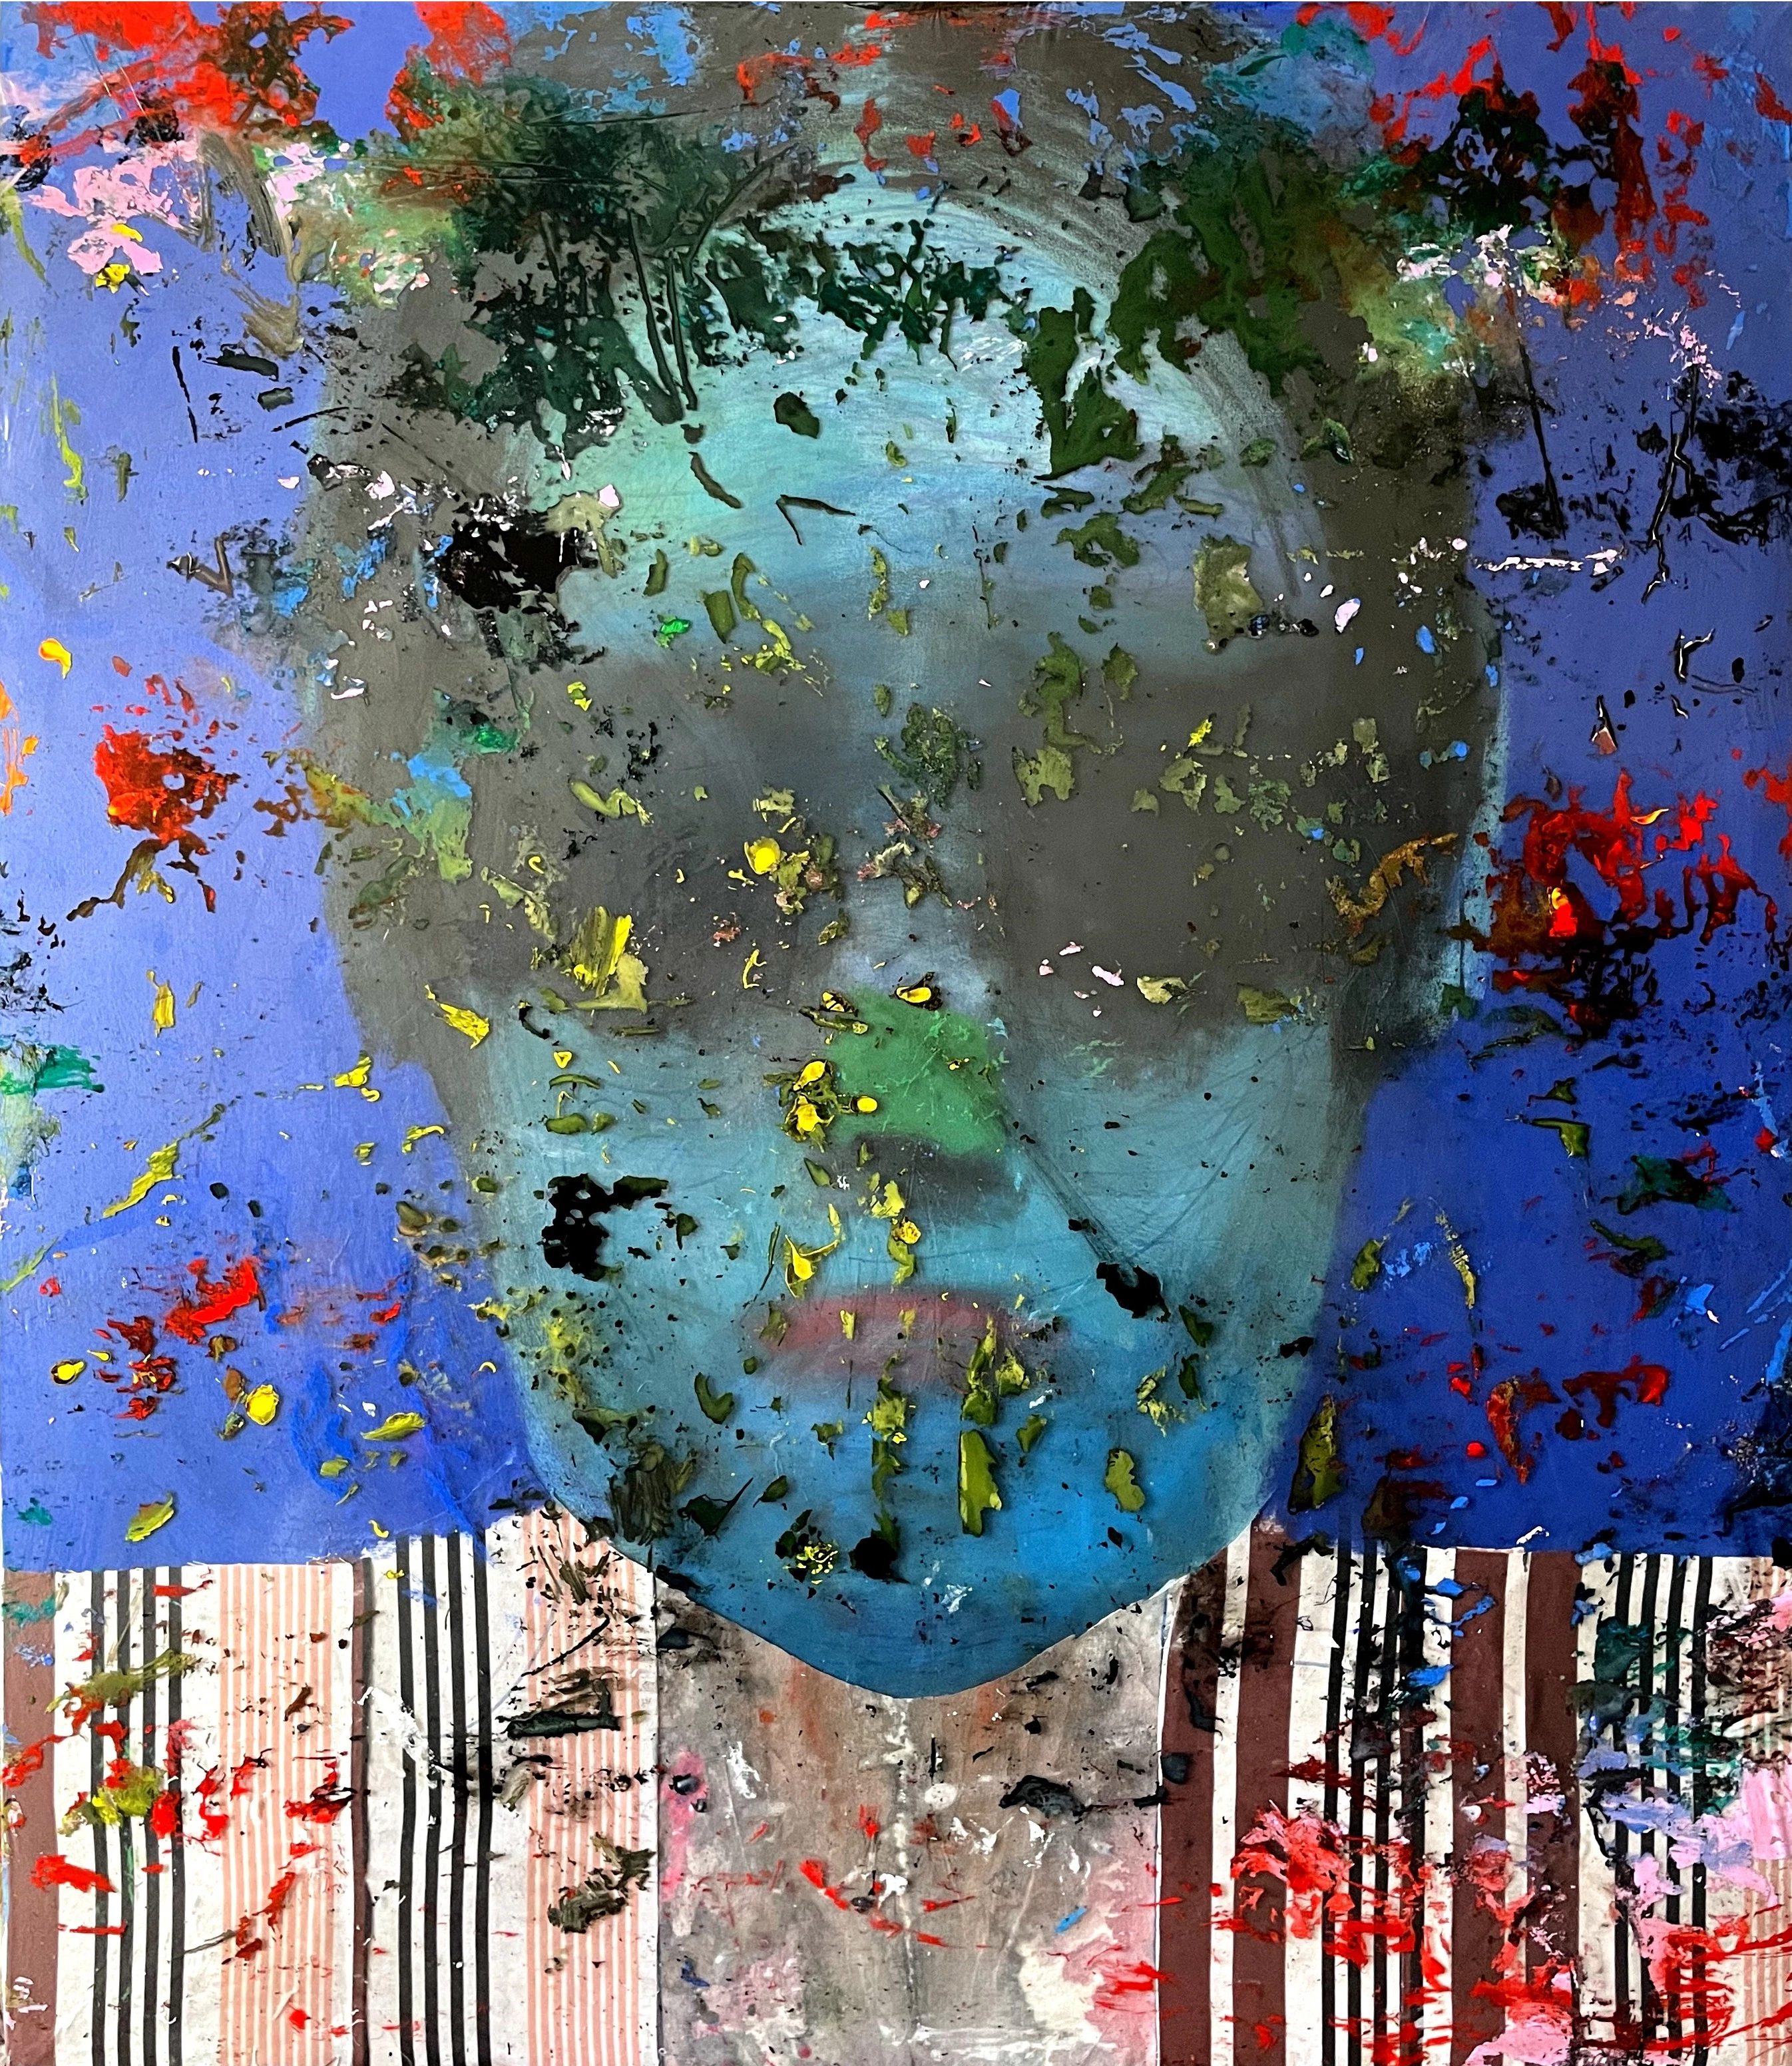 Abstracted face in blue and red